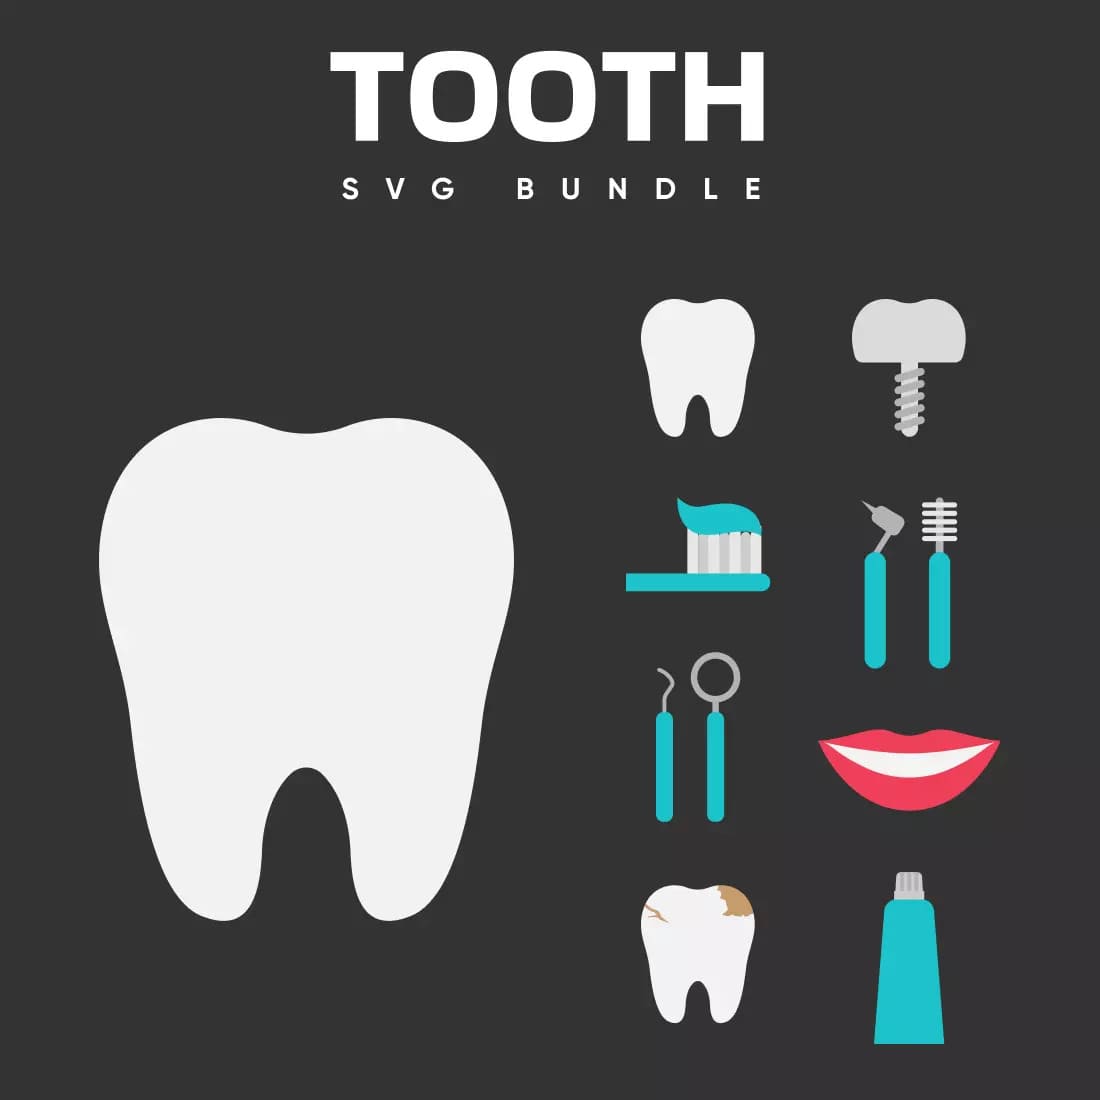 Tooth SVG Bundle Preview.